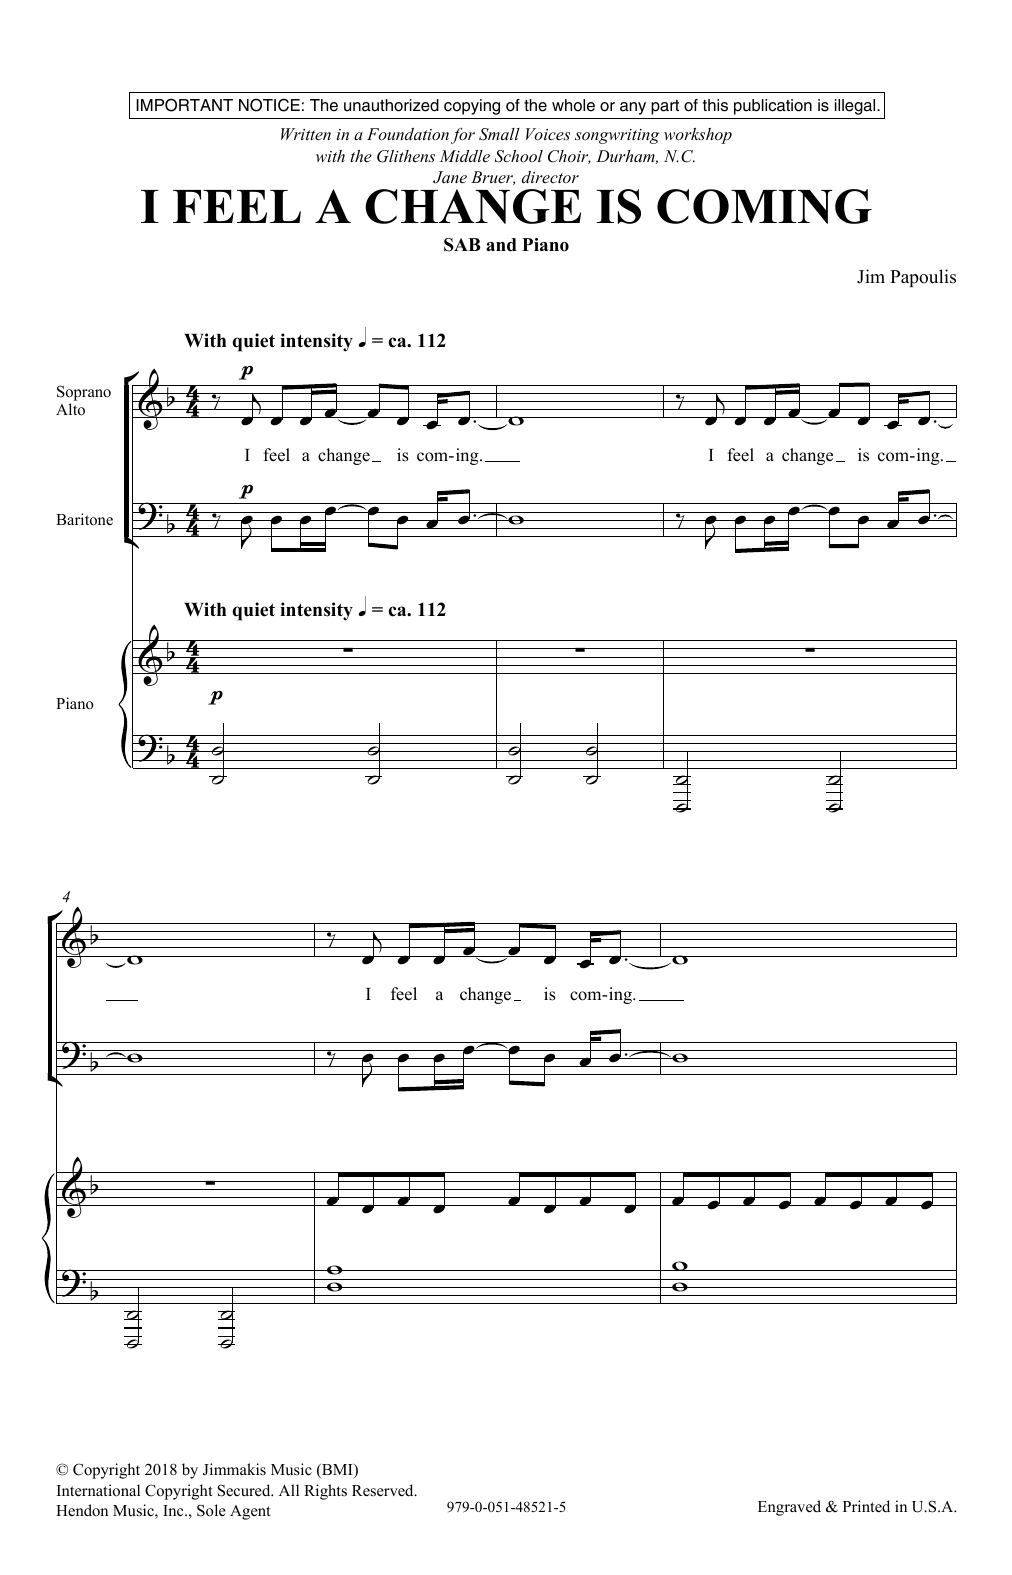 Download Jim Papoulis I Feel A Change Is Coming Sheet Music